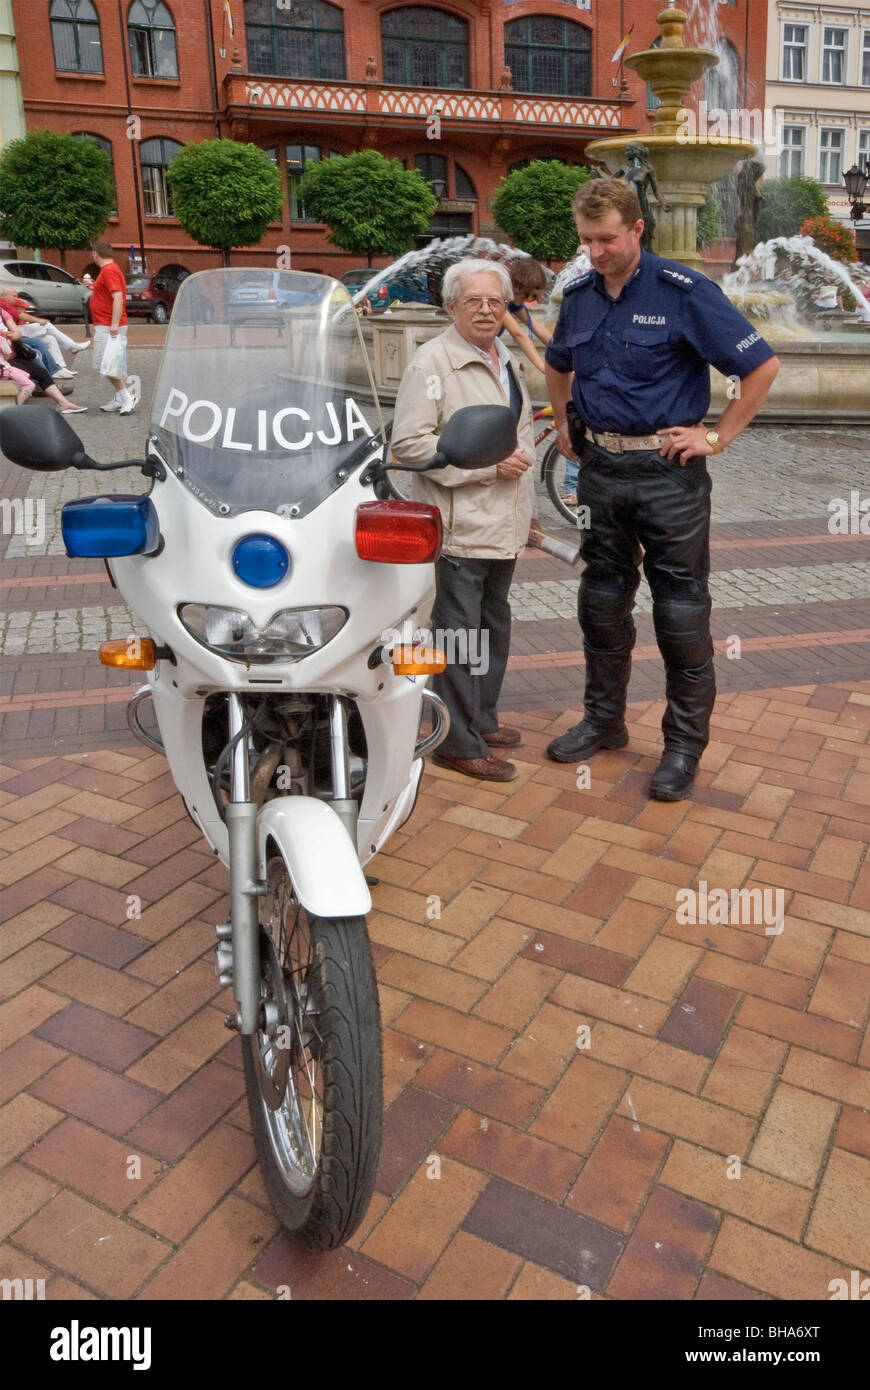 Local police officer and his motorcycle during Police Festival at Stary Rynek (Old Market Square) in Chojnice, Pomorskie, Poland Stock Photo